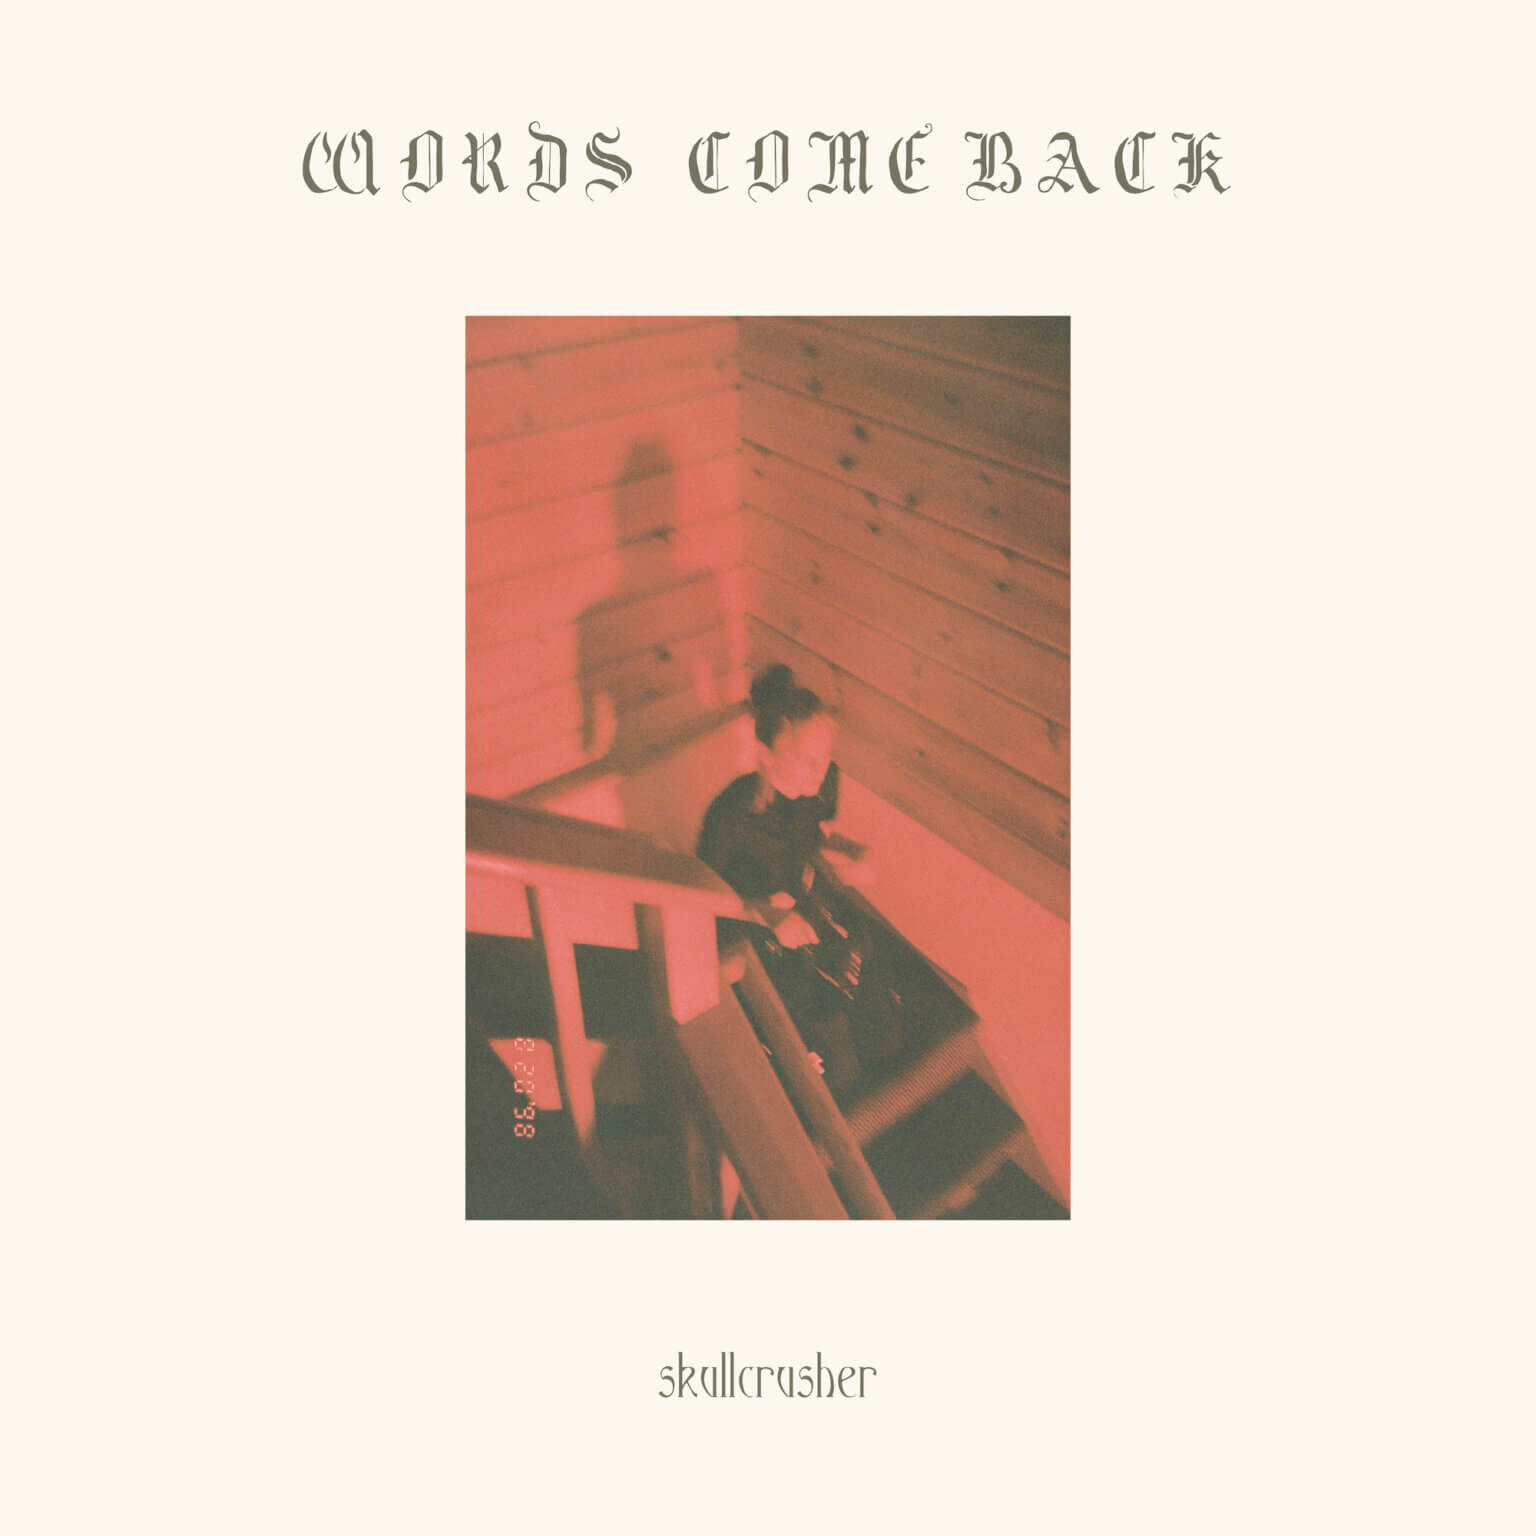 "Words Come Back" by Skullcrusher is Northern Transmissions Song of the Day. The singer/songwriter's cover is now available via Numero Group